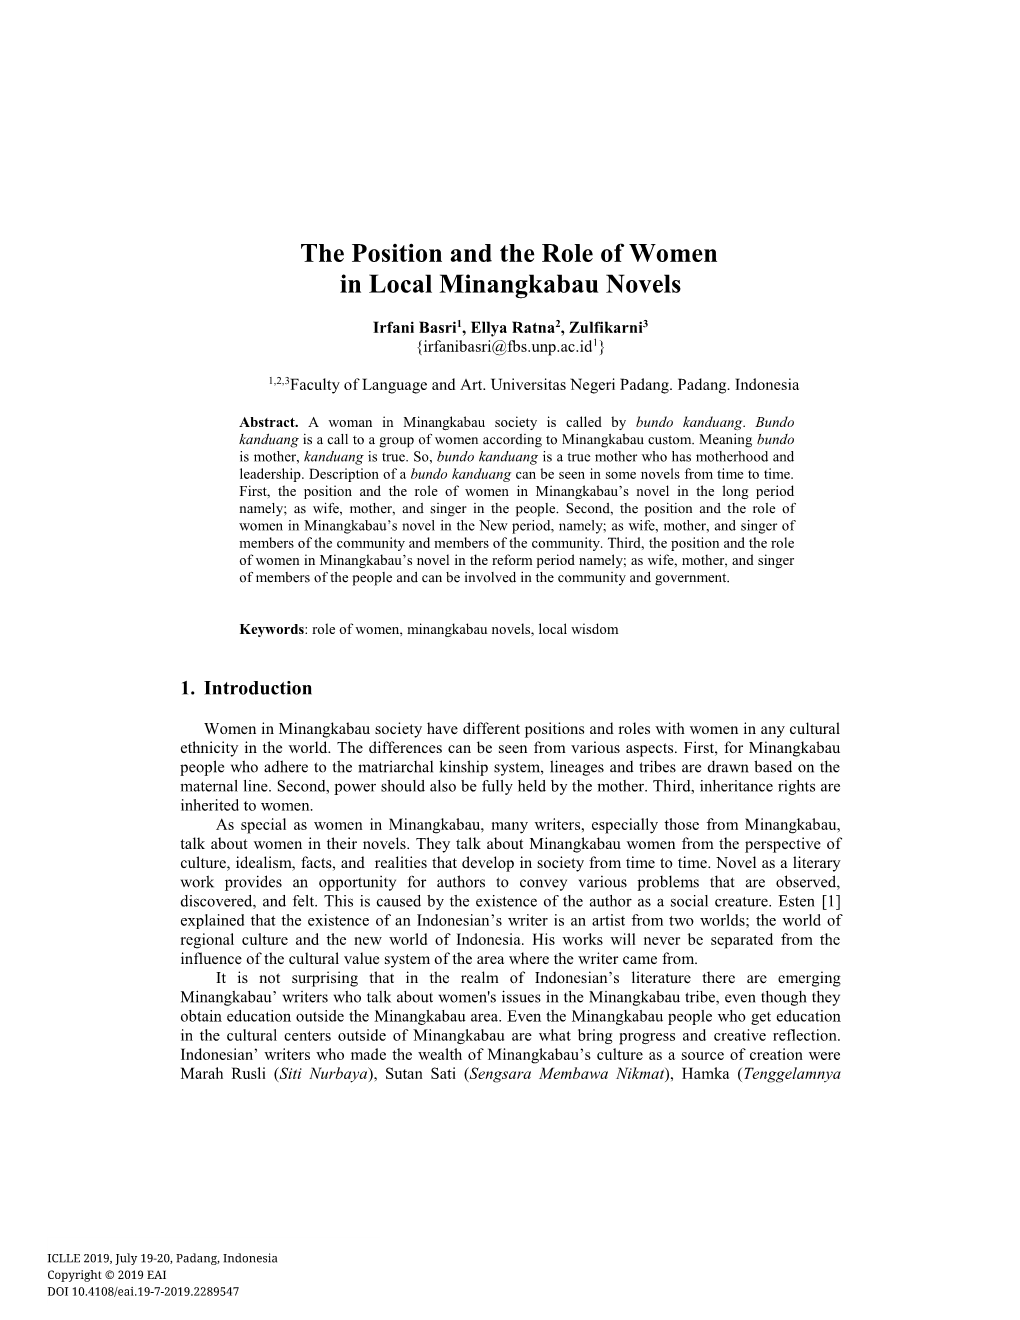 The Position and the Role of Women in Local Minangkabau Novels